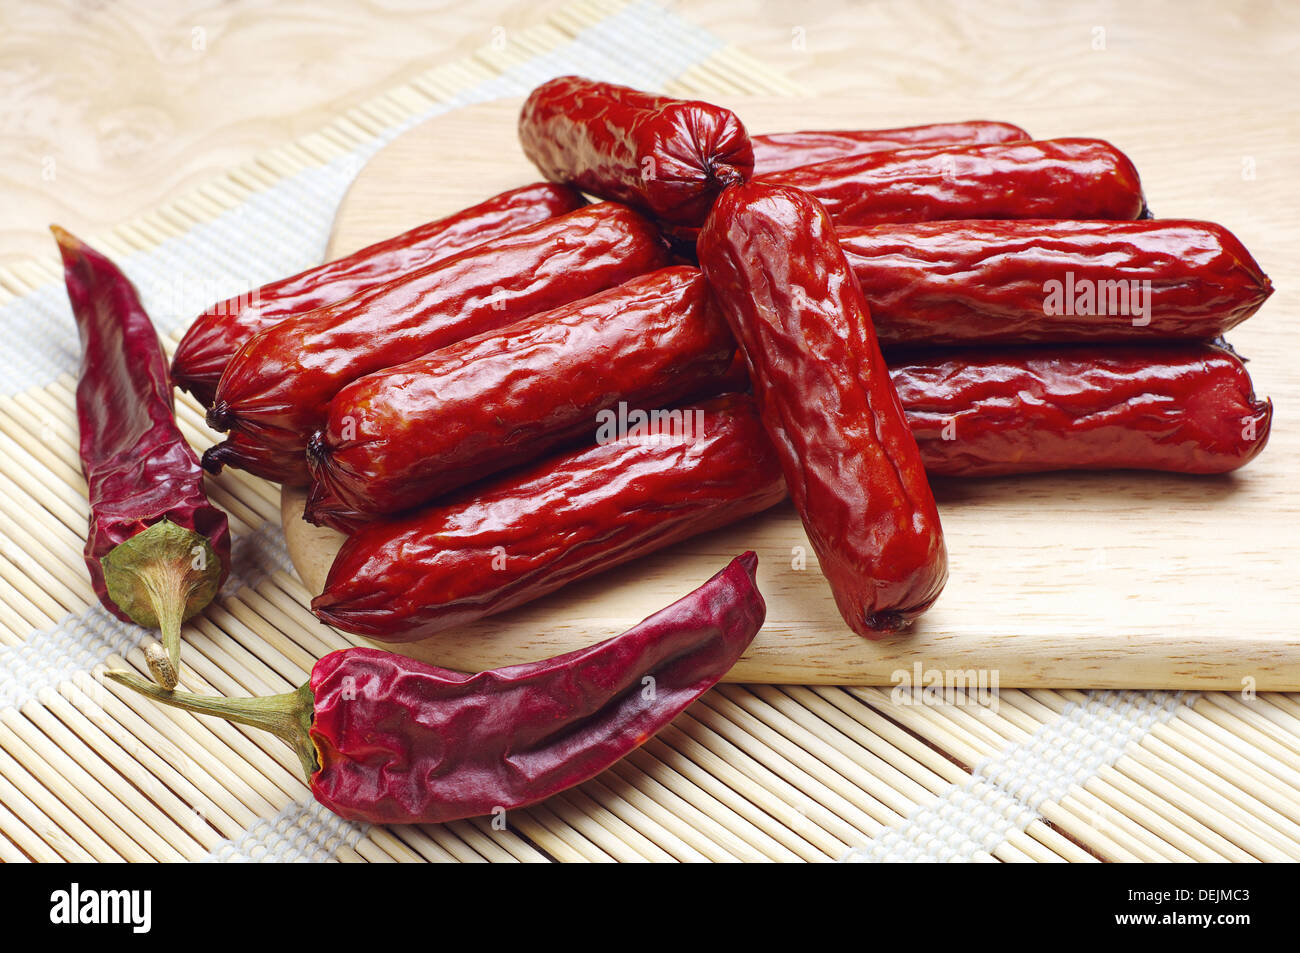 Small smoked sausages and dry chili peppers on a cutting board Stock Photo